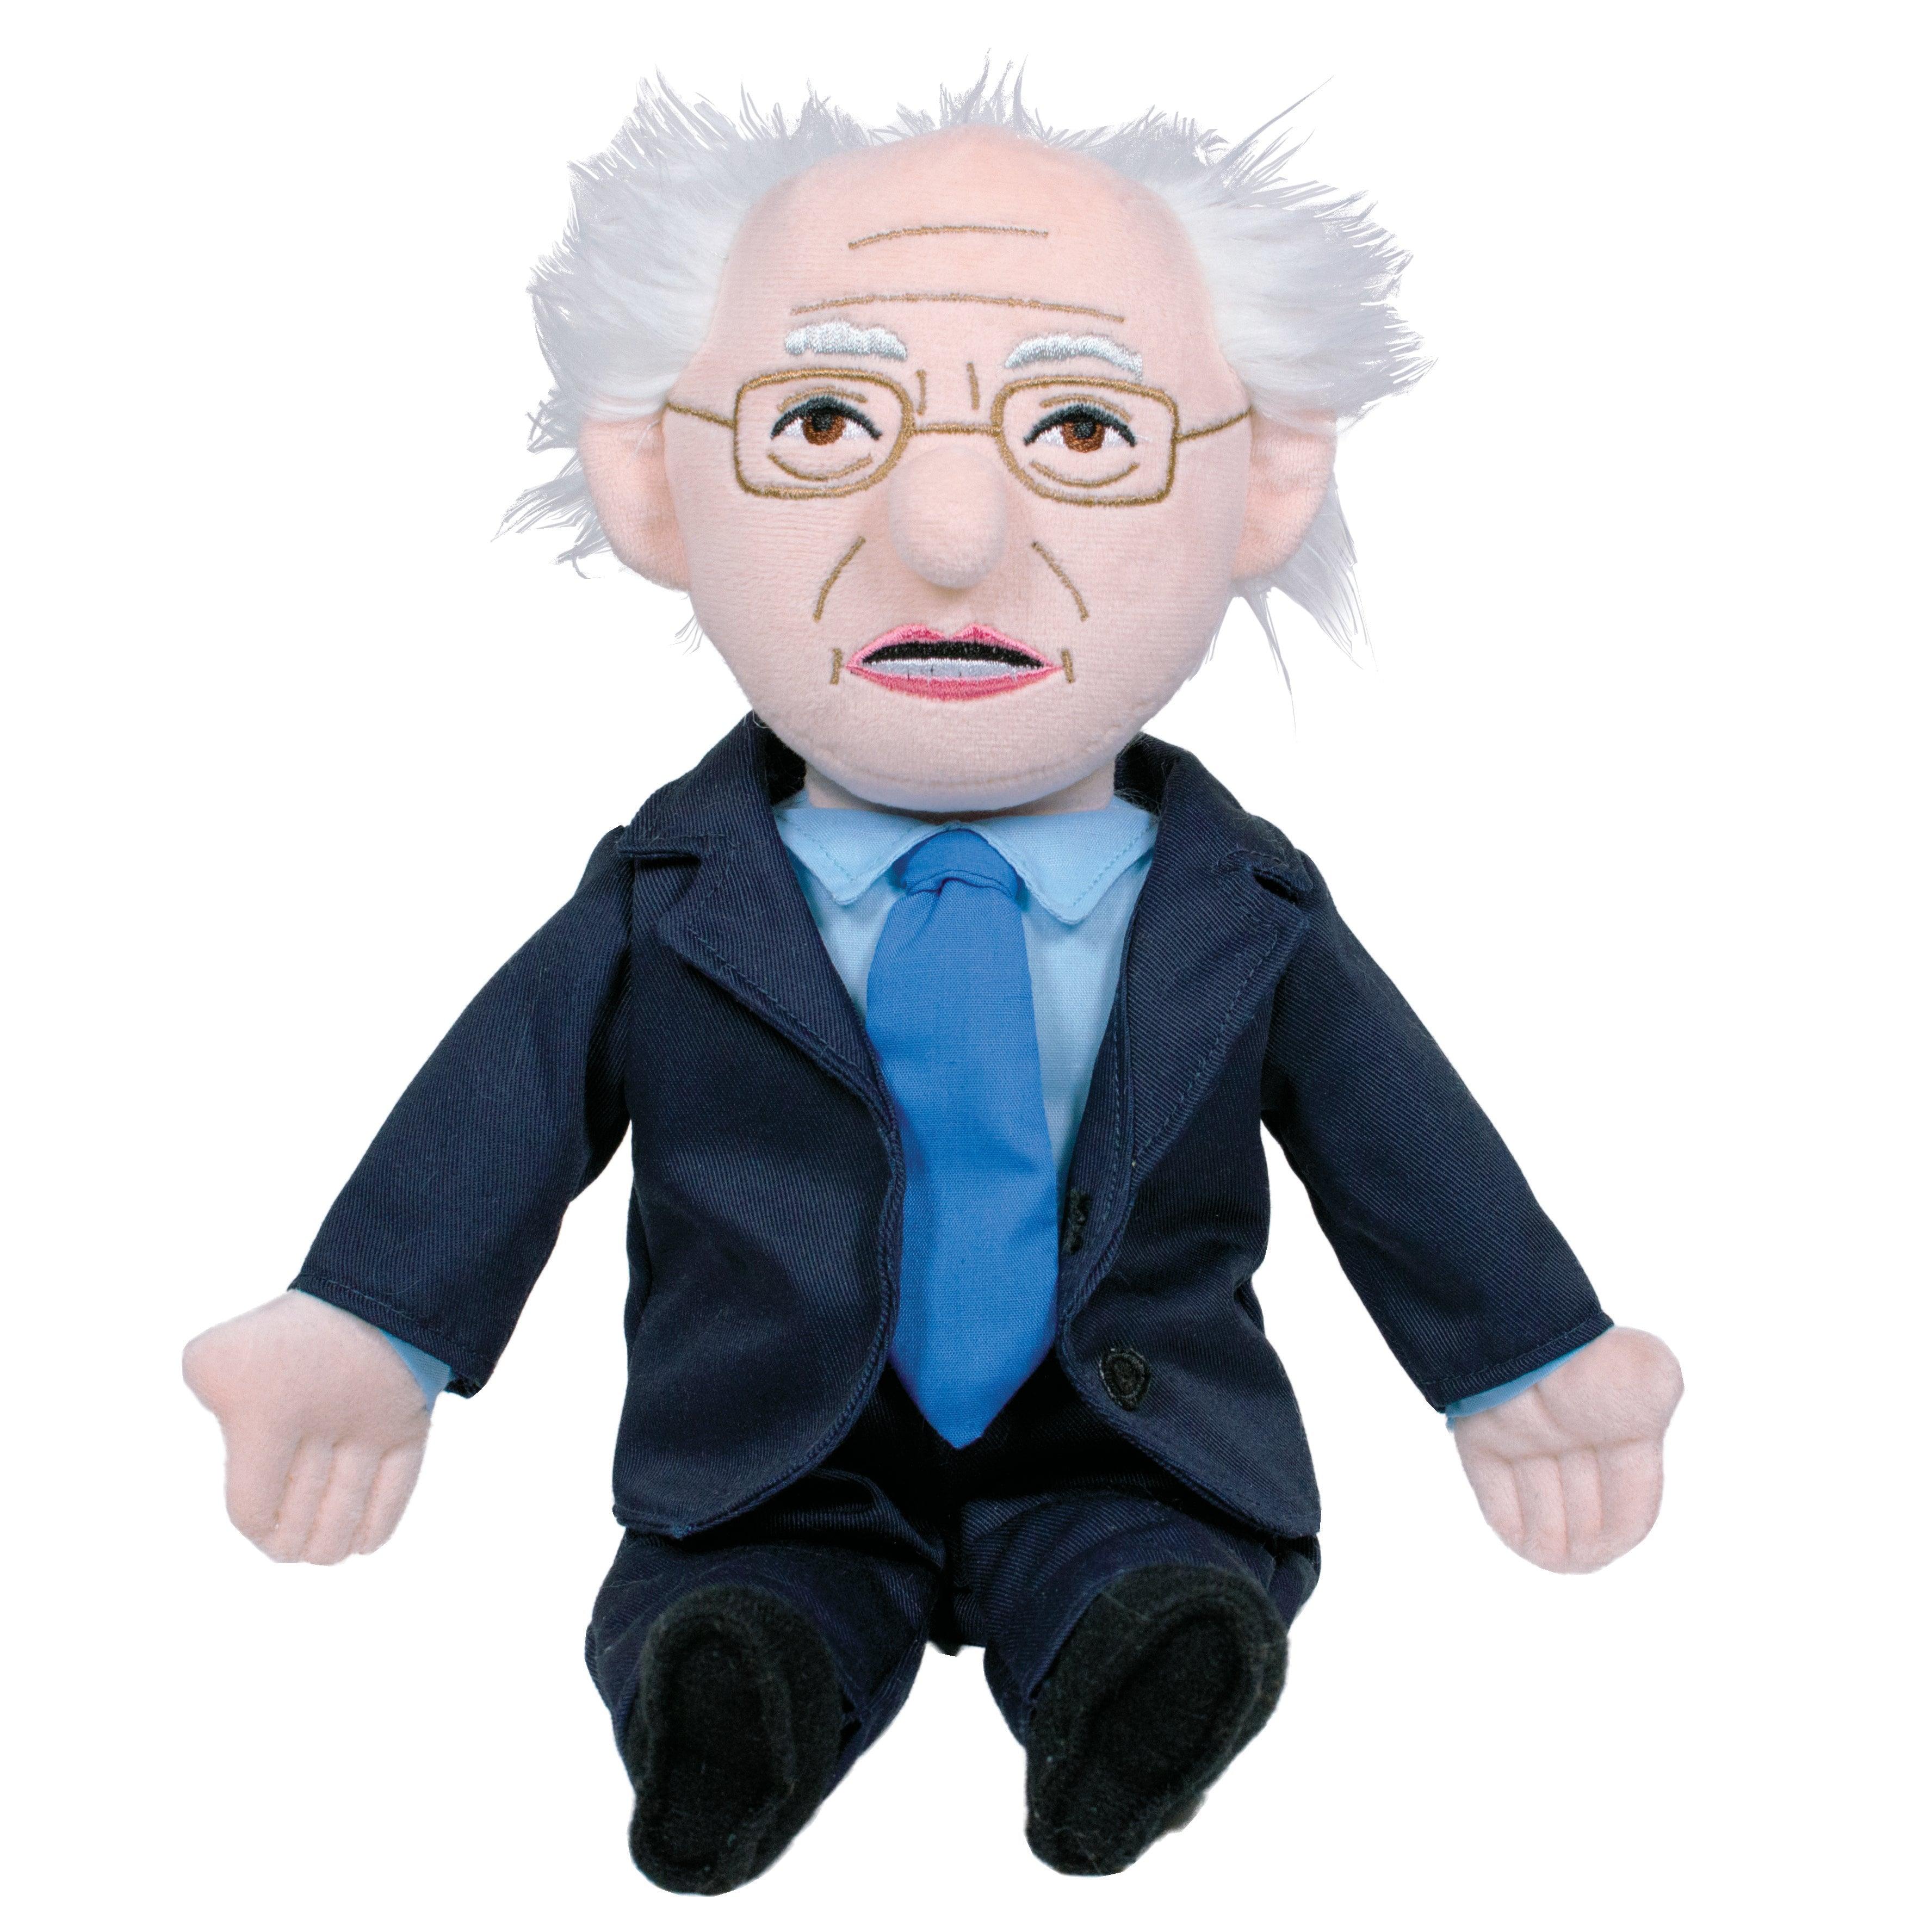 Product photo of Bernie Sanders Plush Doll, a novelty gift manufactured by The Unemployed Philosophers Guild.